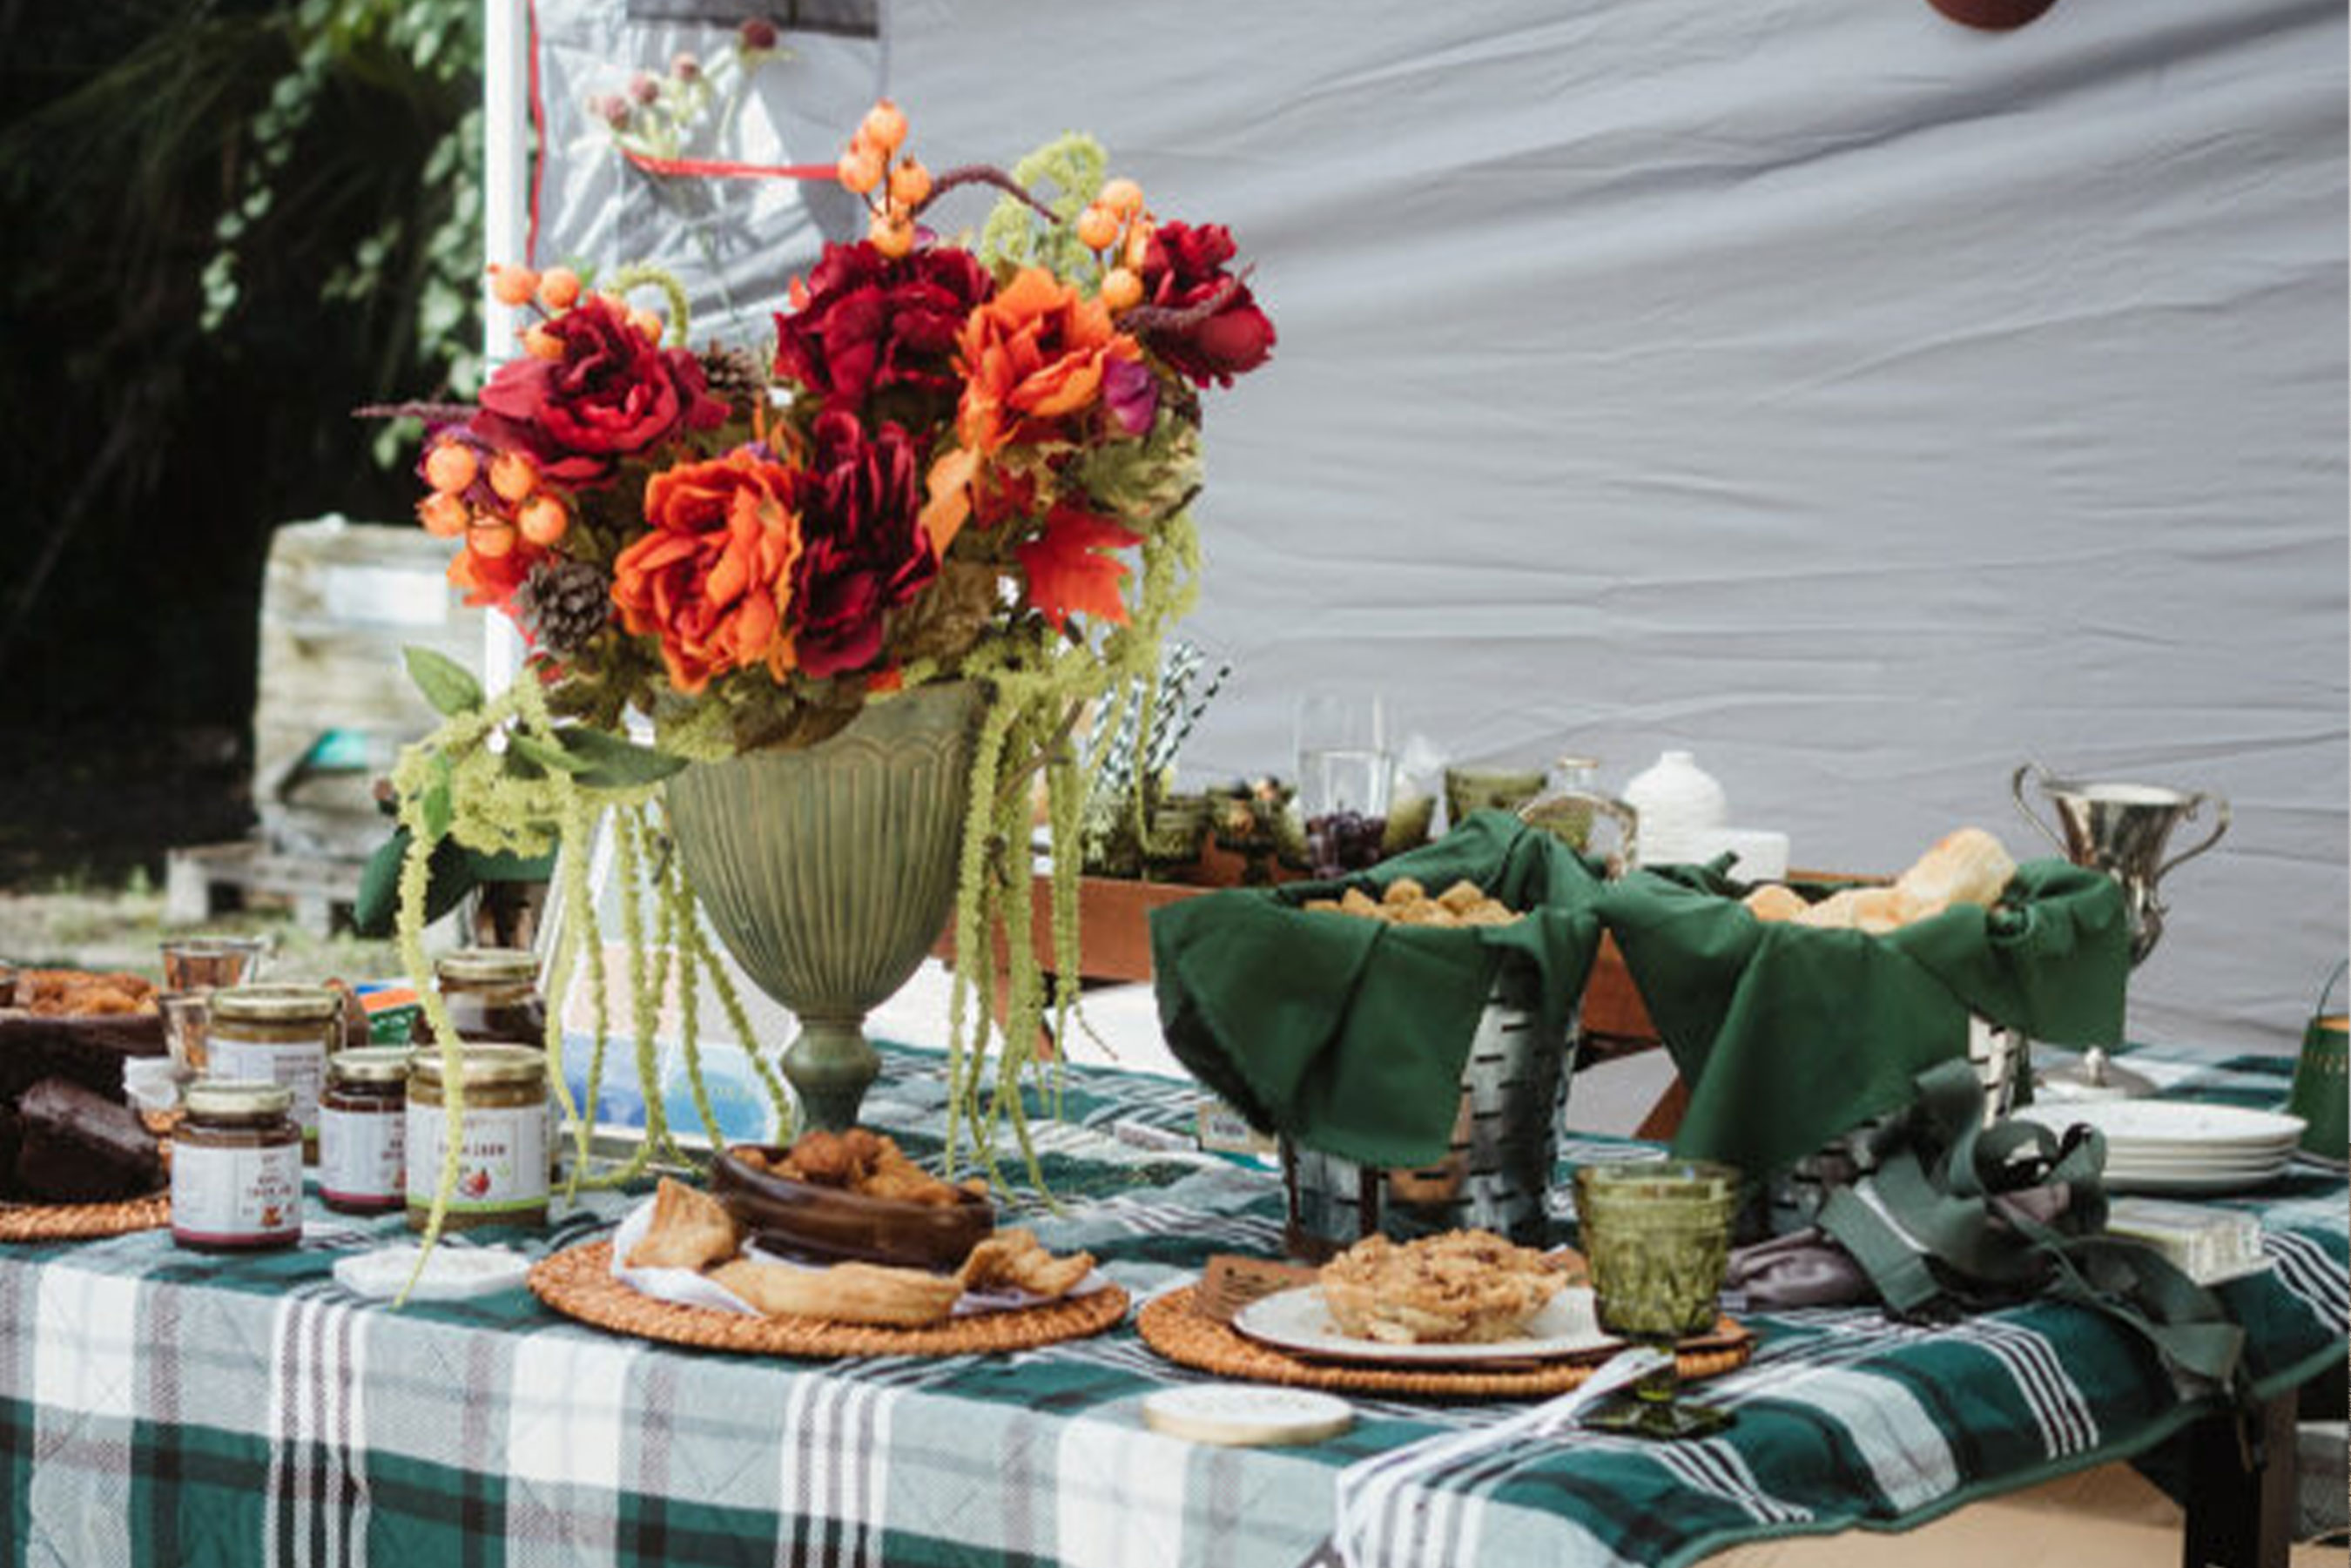 Southern tastemaker Michiel Perry shares her ideas for planning a winning tailgate.